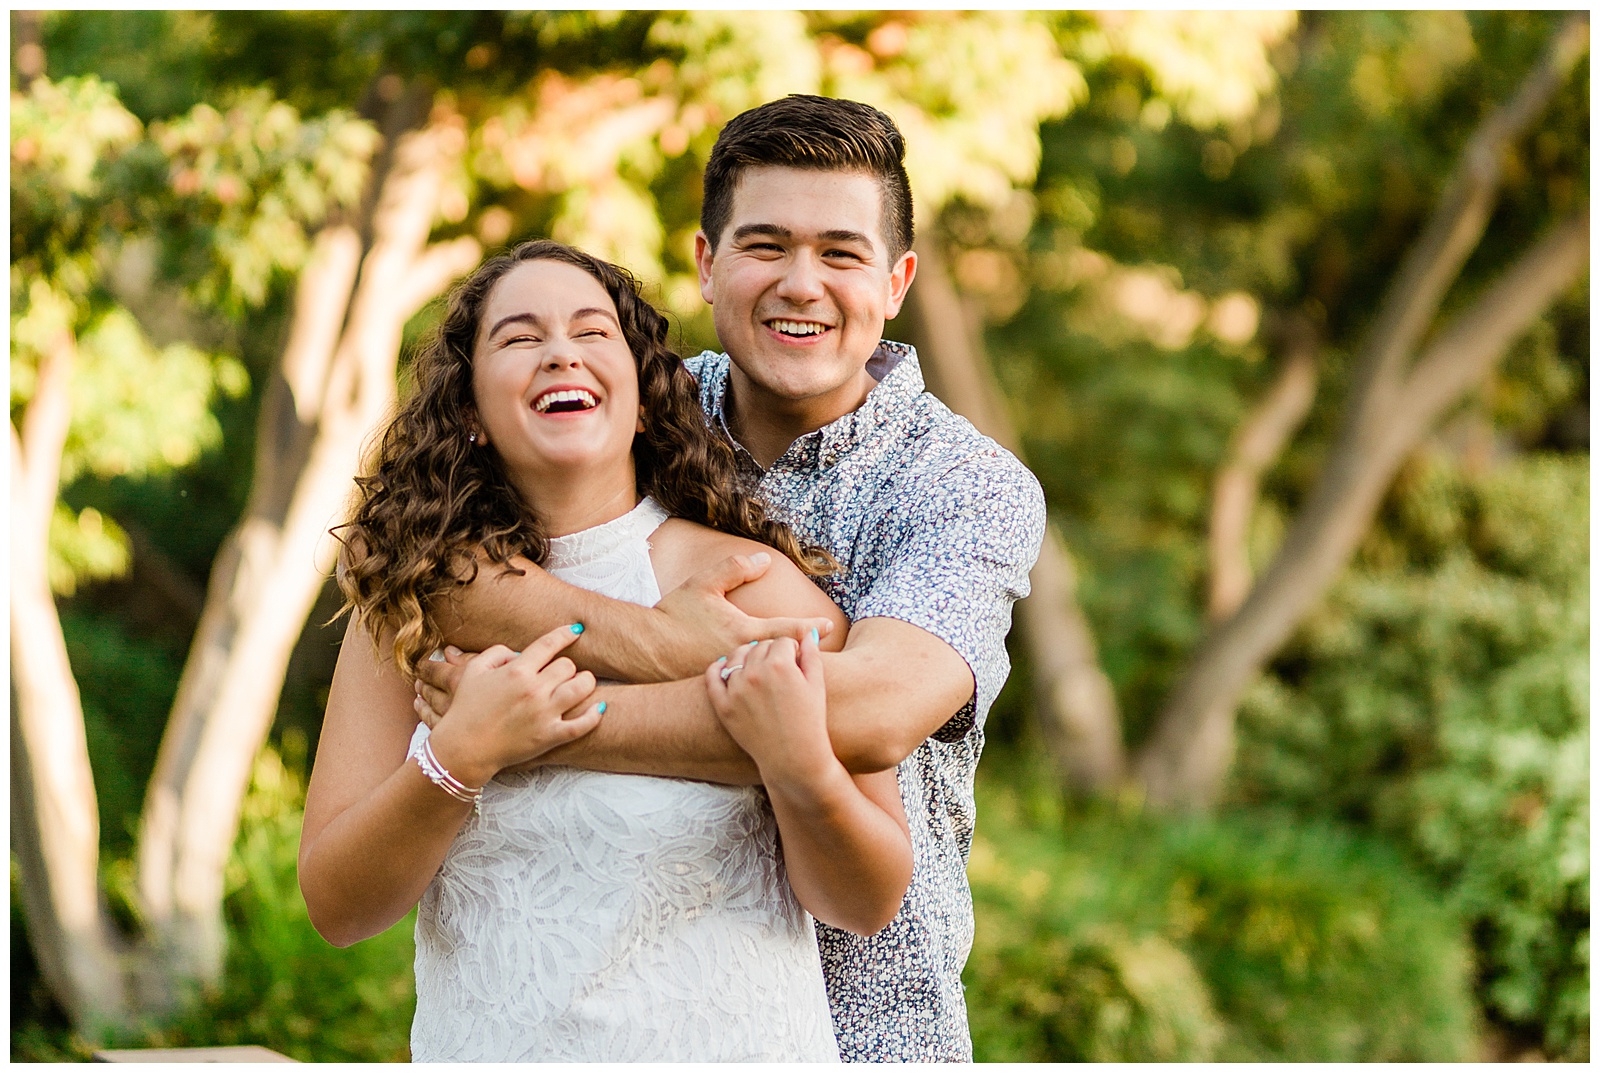 newly engaged couple laughing during a sunset photo shoot by megan helm photography fresno wedding photographer